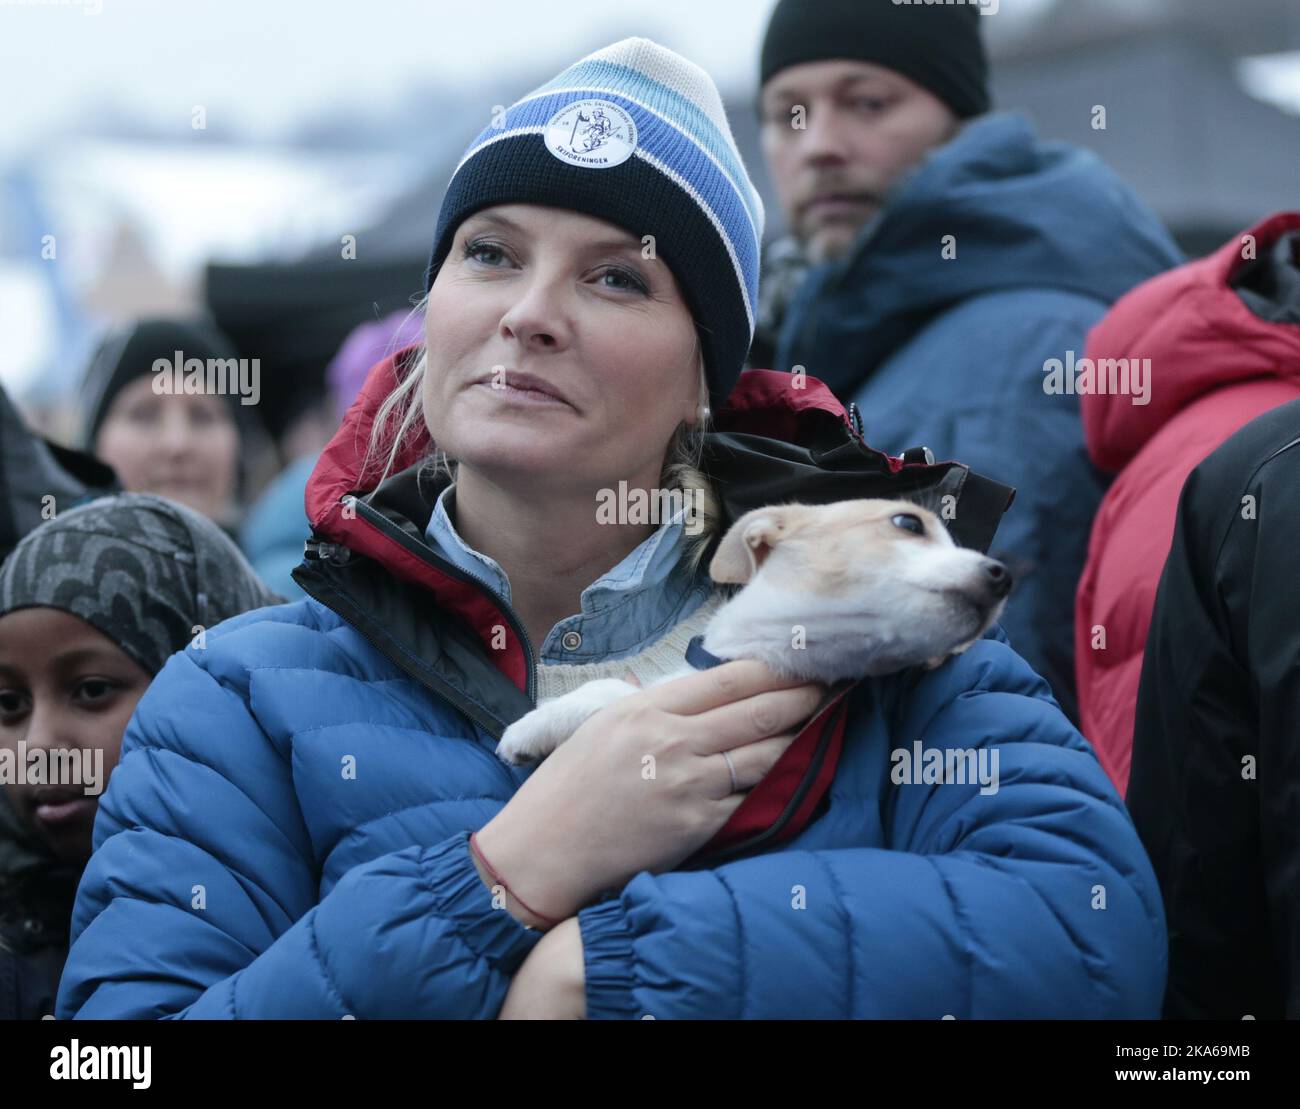 Oslo, Norway 20150113. The Royal Crown Prince Couple visit Toyenparken in Oslo on Tuesday for the opening of the Outdoor Recreation Year 2015 (Friluftlivets aar). 1600 children an youth attended the opening. Here puppy 'Toeffen' owned by mayor Fabian Stang receives the royal touch of the Crown Princess Mette-Marit. Photo: Lise Aaserud / NTB scanpix  Stock Photo